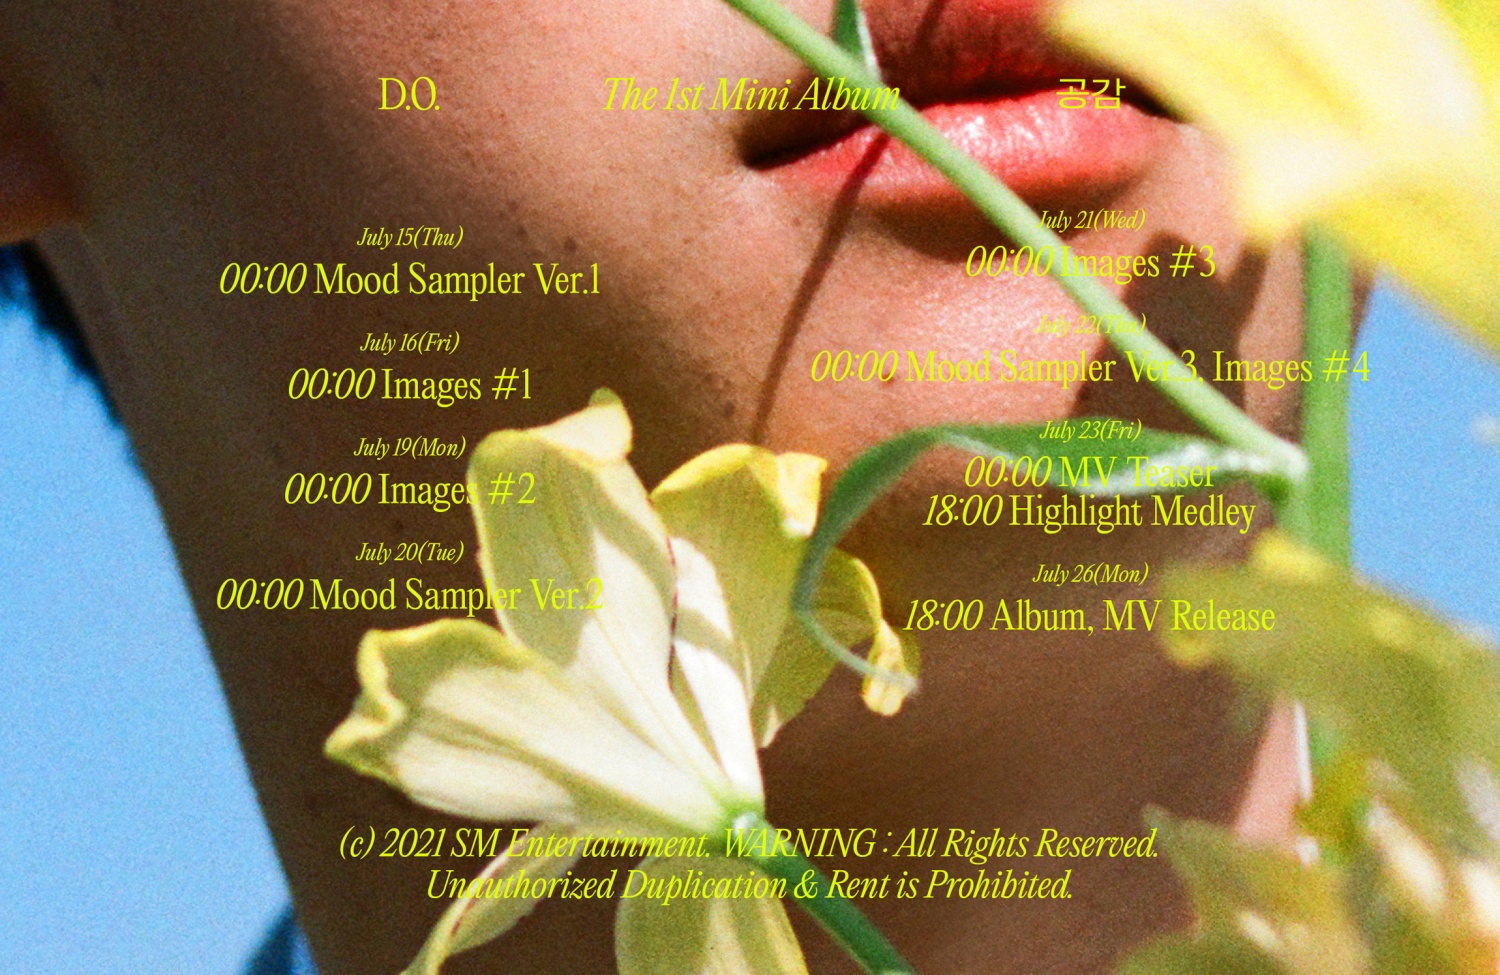 EXO D.O.'s first solo album title song 'Rose'... A love song full of excitement